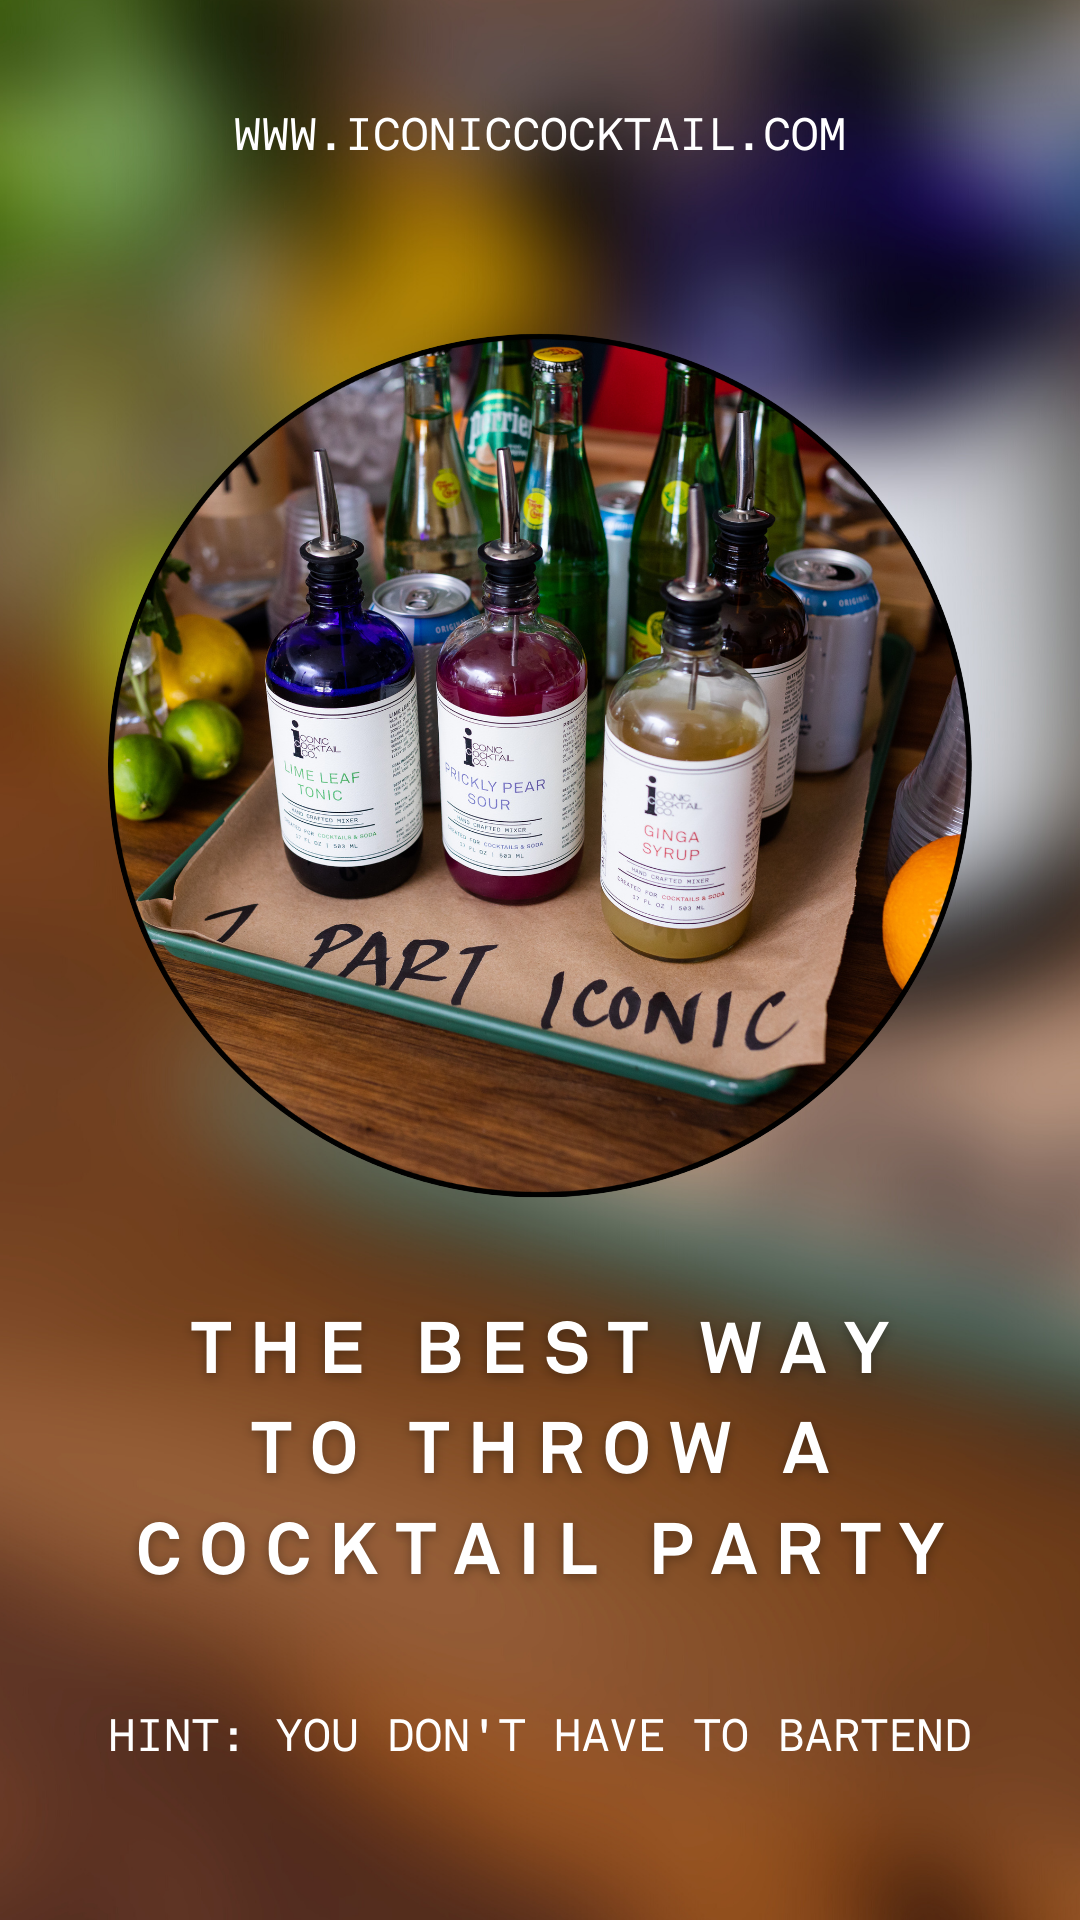 The Best Way to Throw a Cocktail Party this Season